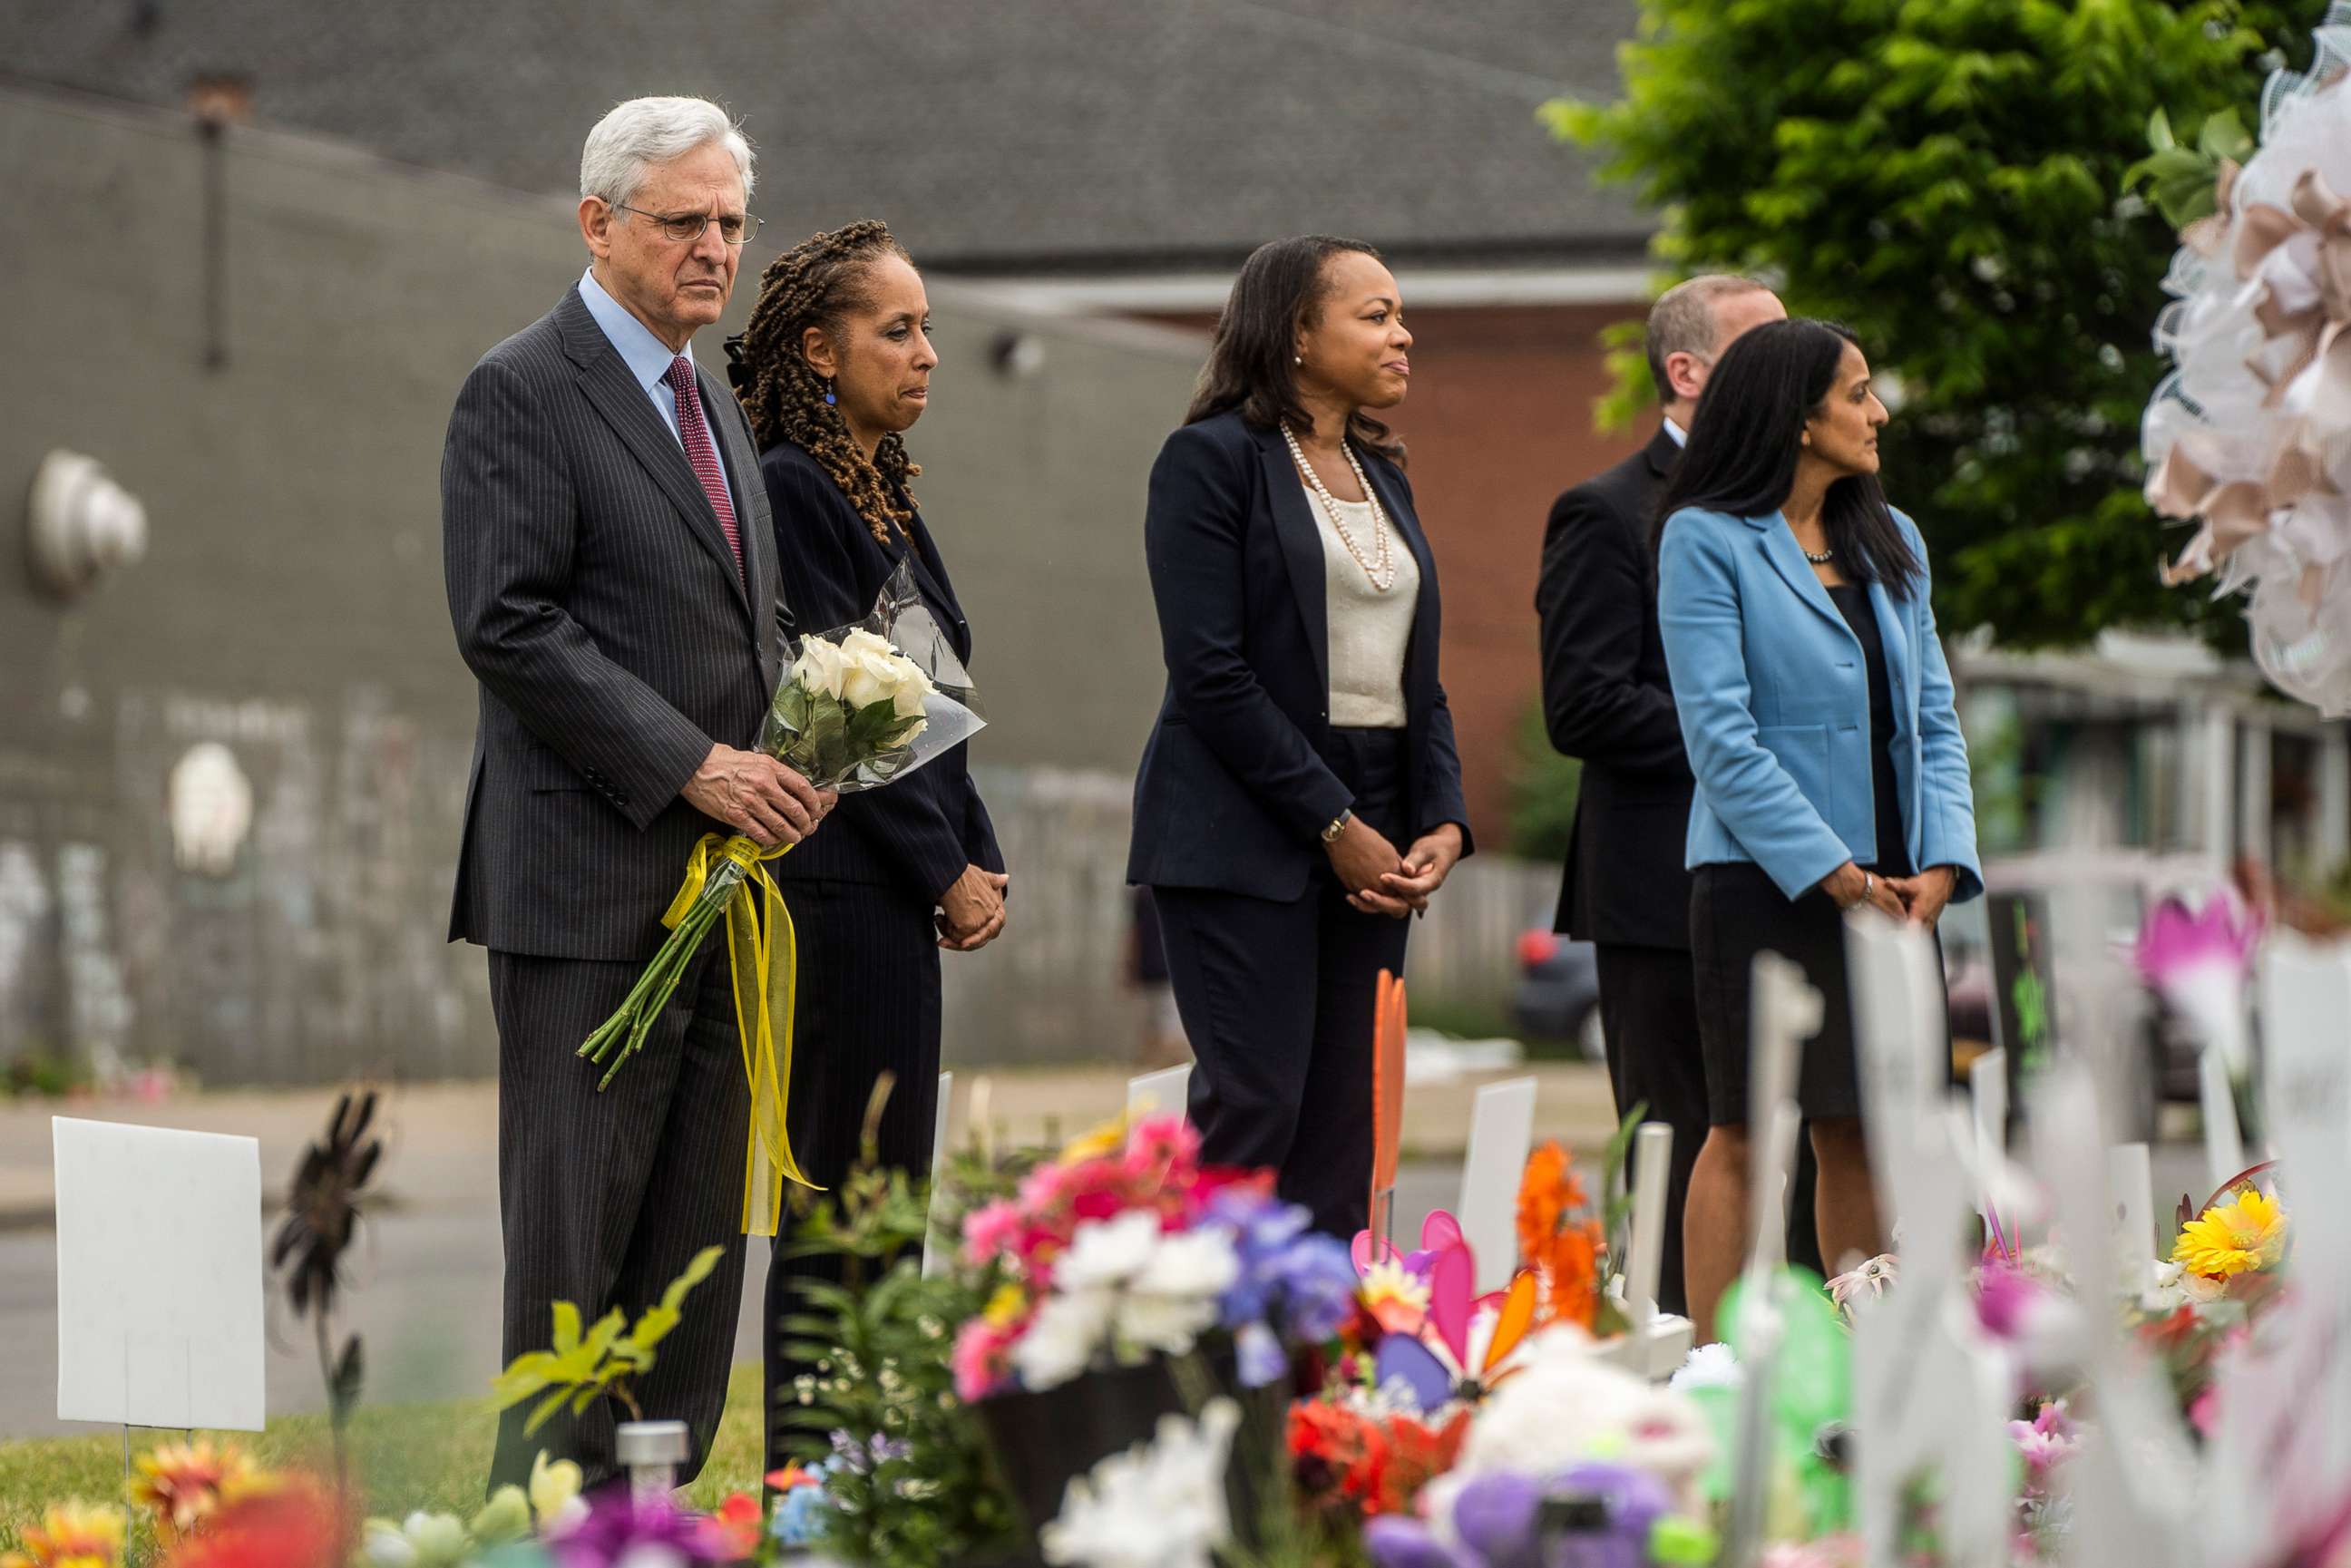 PHOTO: Attorney General Merrick Garland visits the memorial for victims of the May 14 mass shooting at a Tops Friendly Market in Buffalo, N.Y. on June 15, 2022.